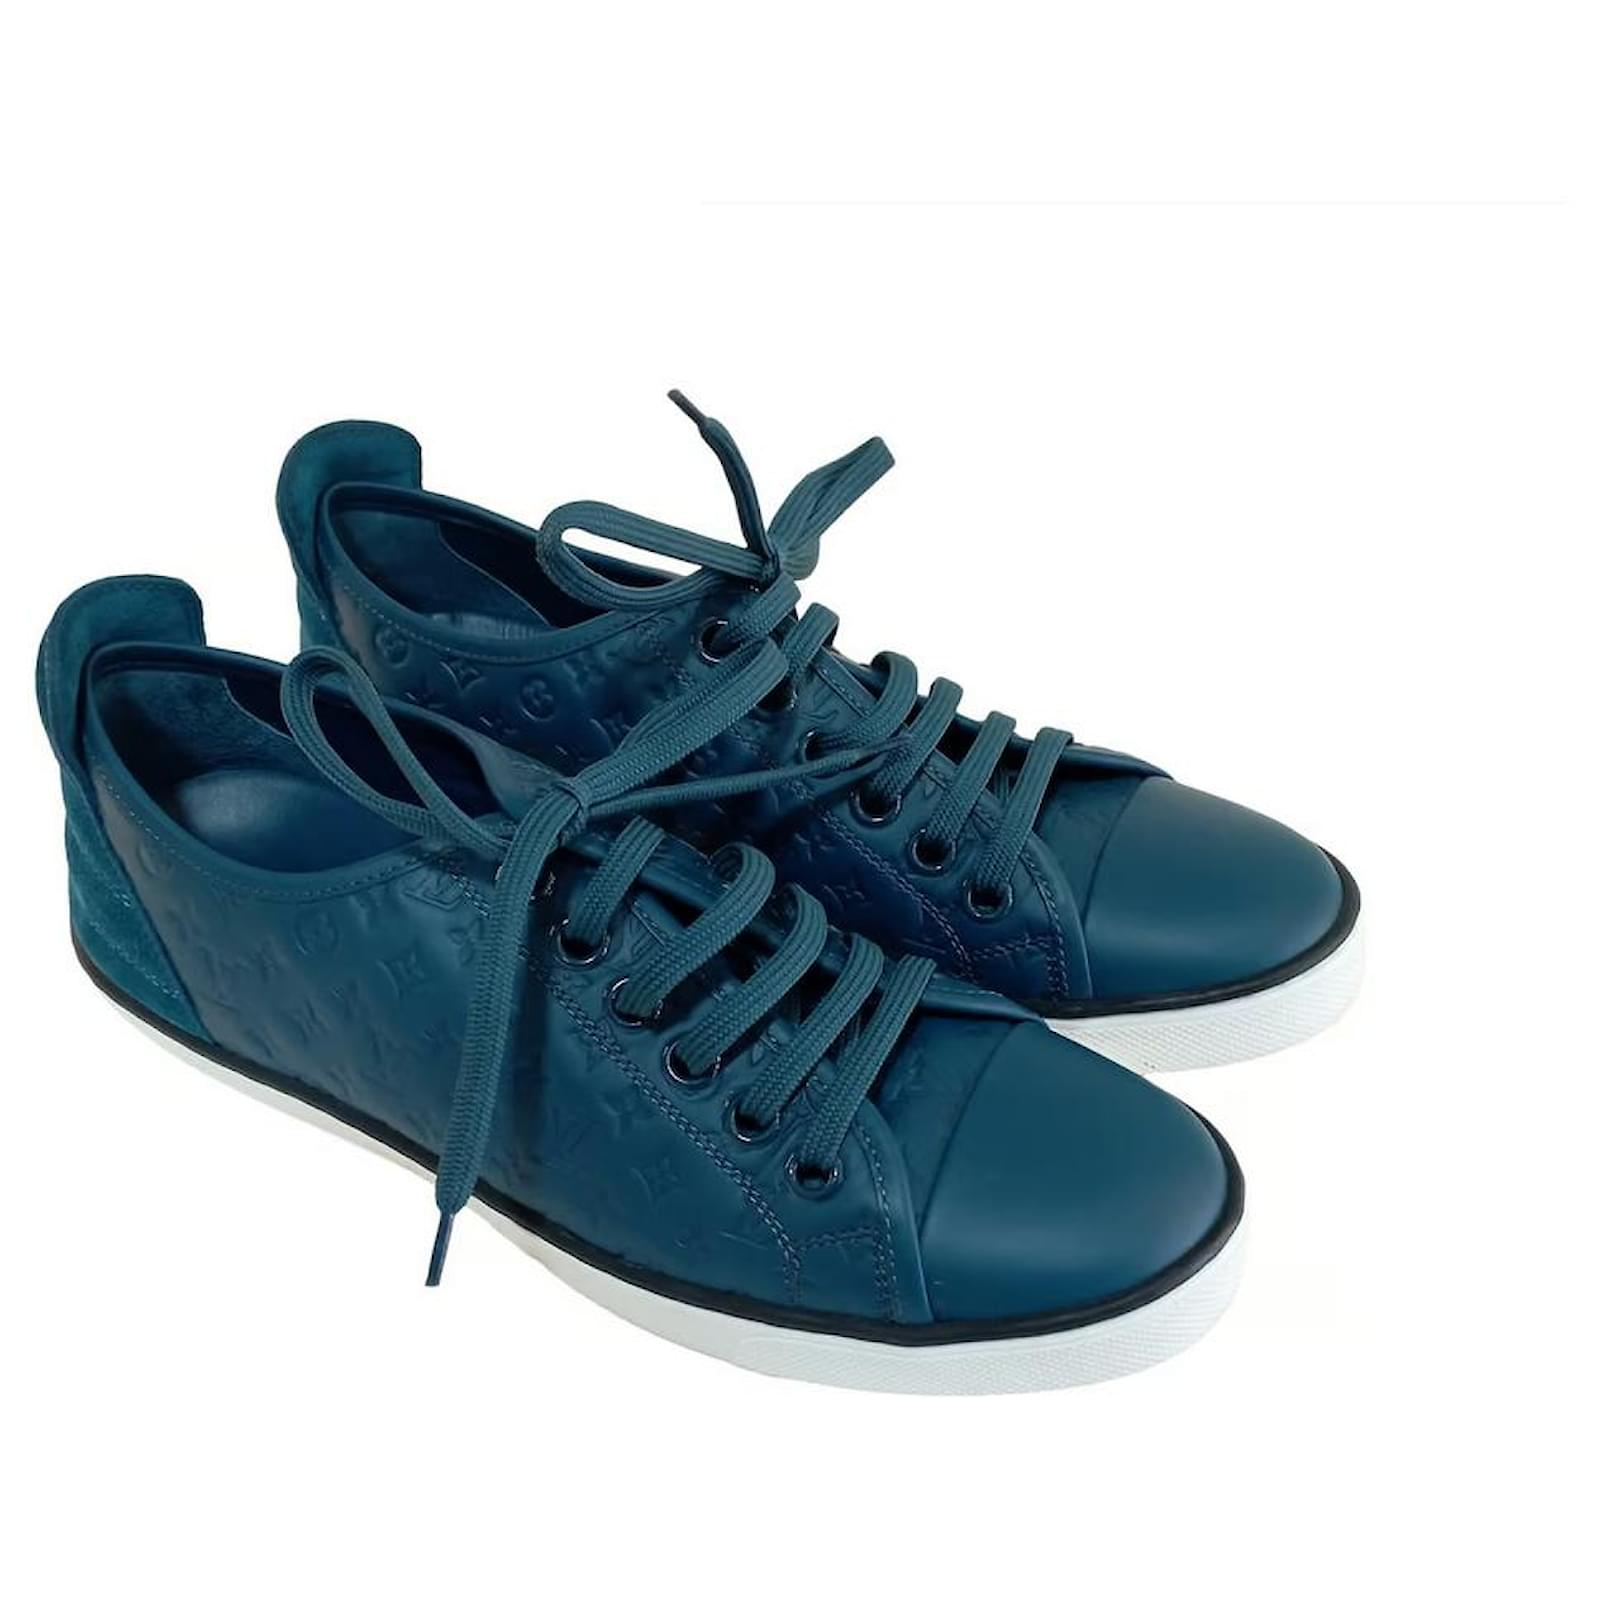 blue and white louis vuitton shoes